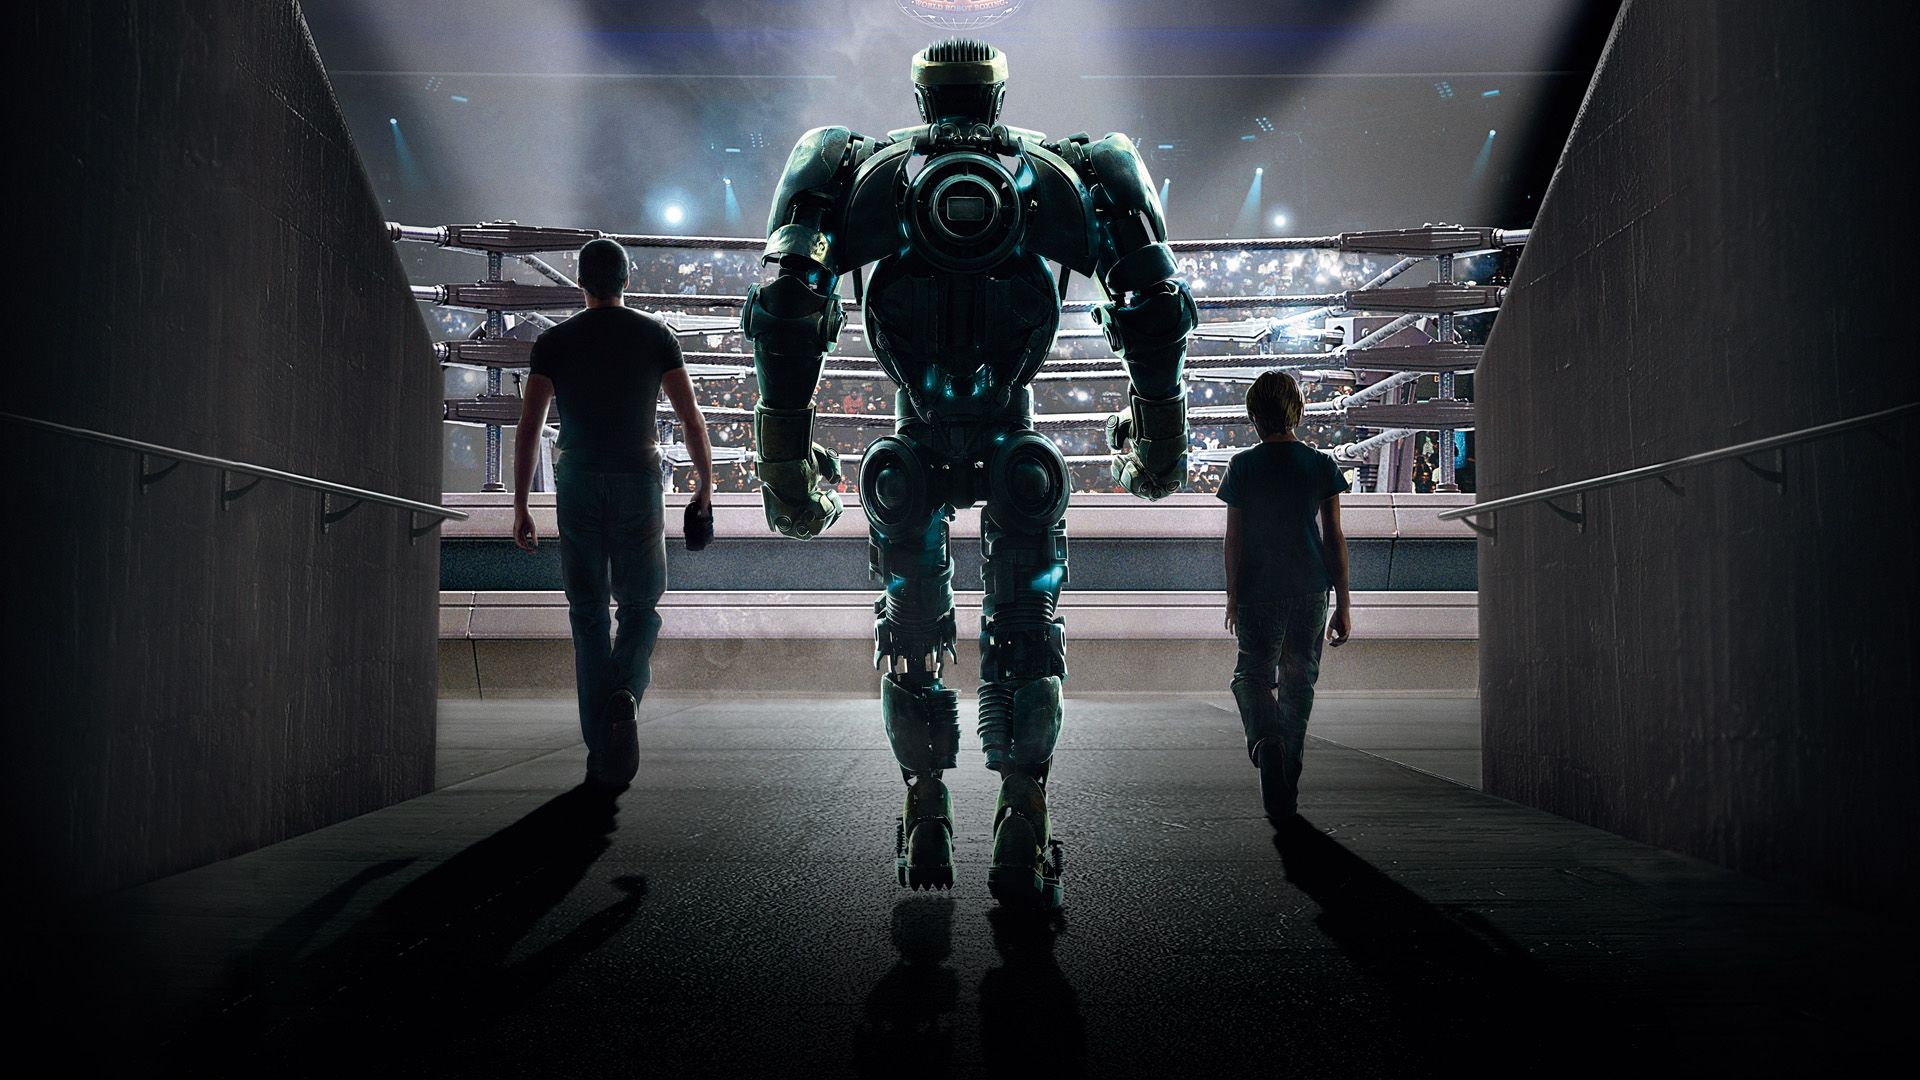 Real Steel background